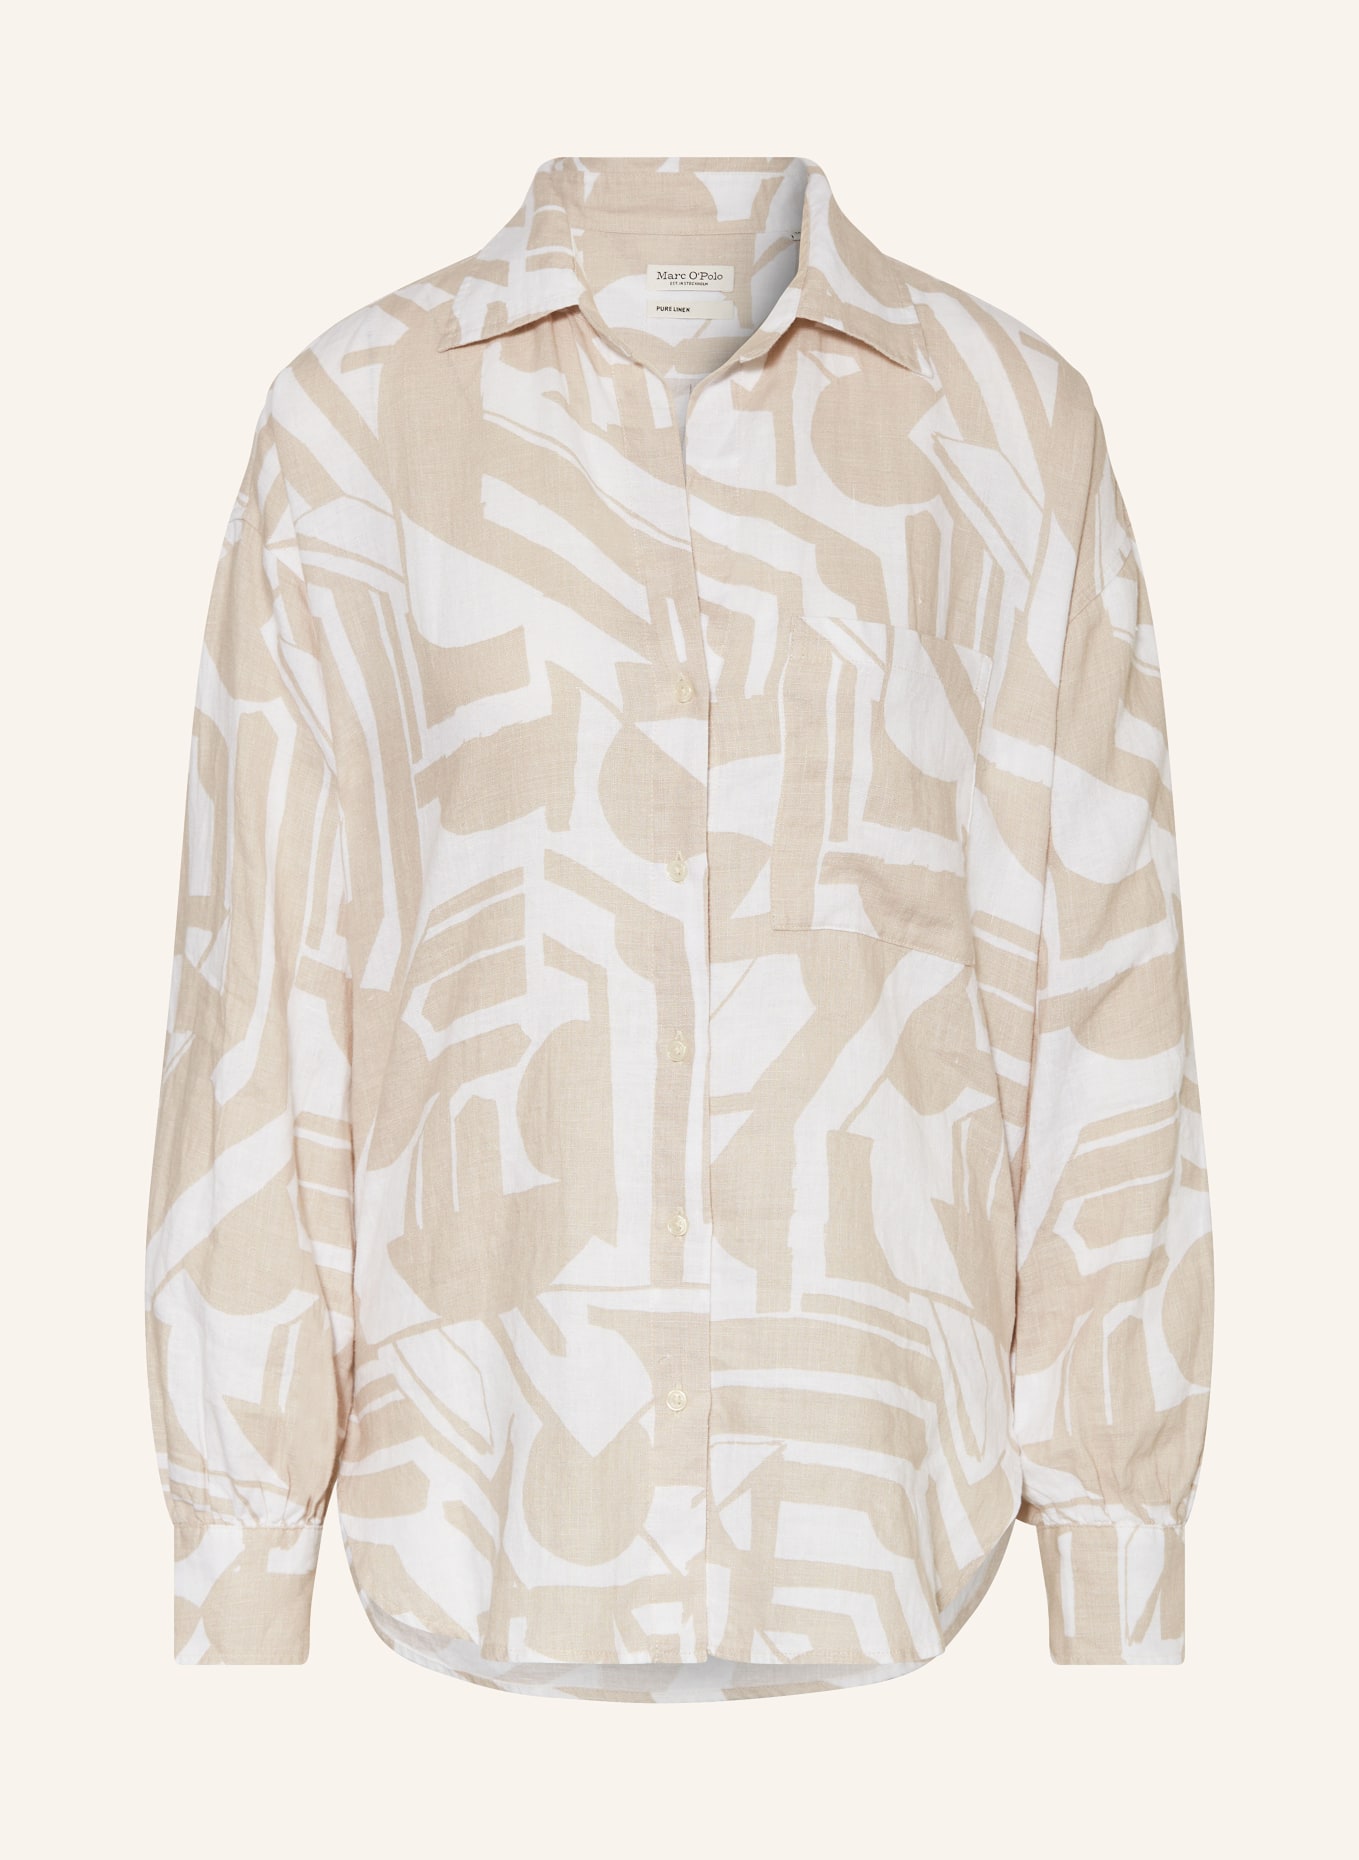 Marc O'Polo Shirt blouse made of linen, Color: BEIGE/ WHITE (Image 1)